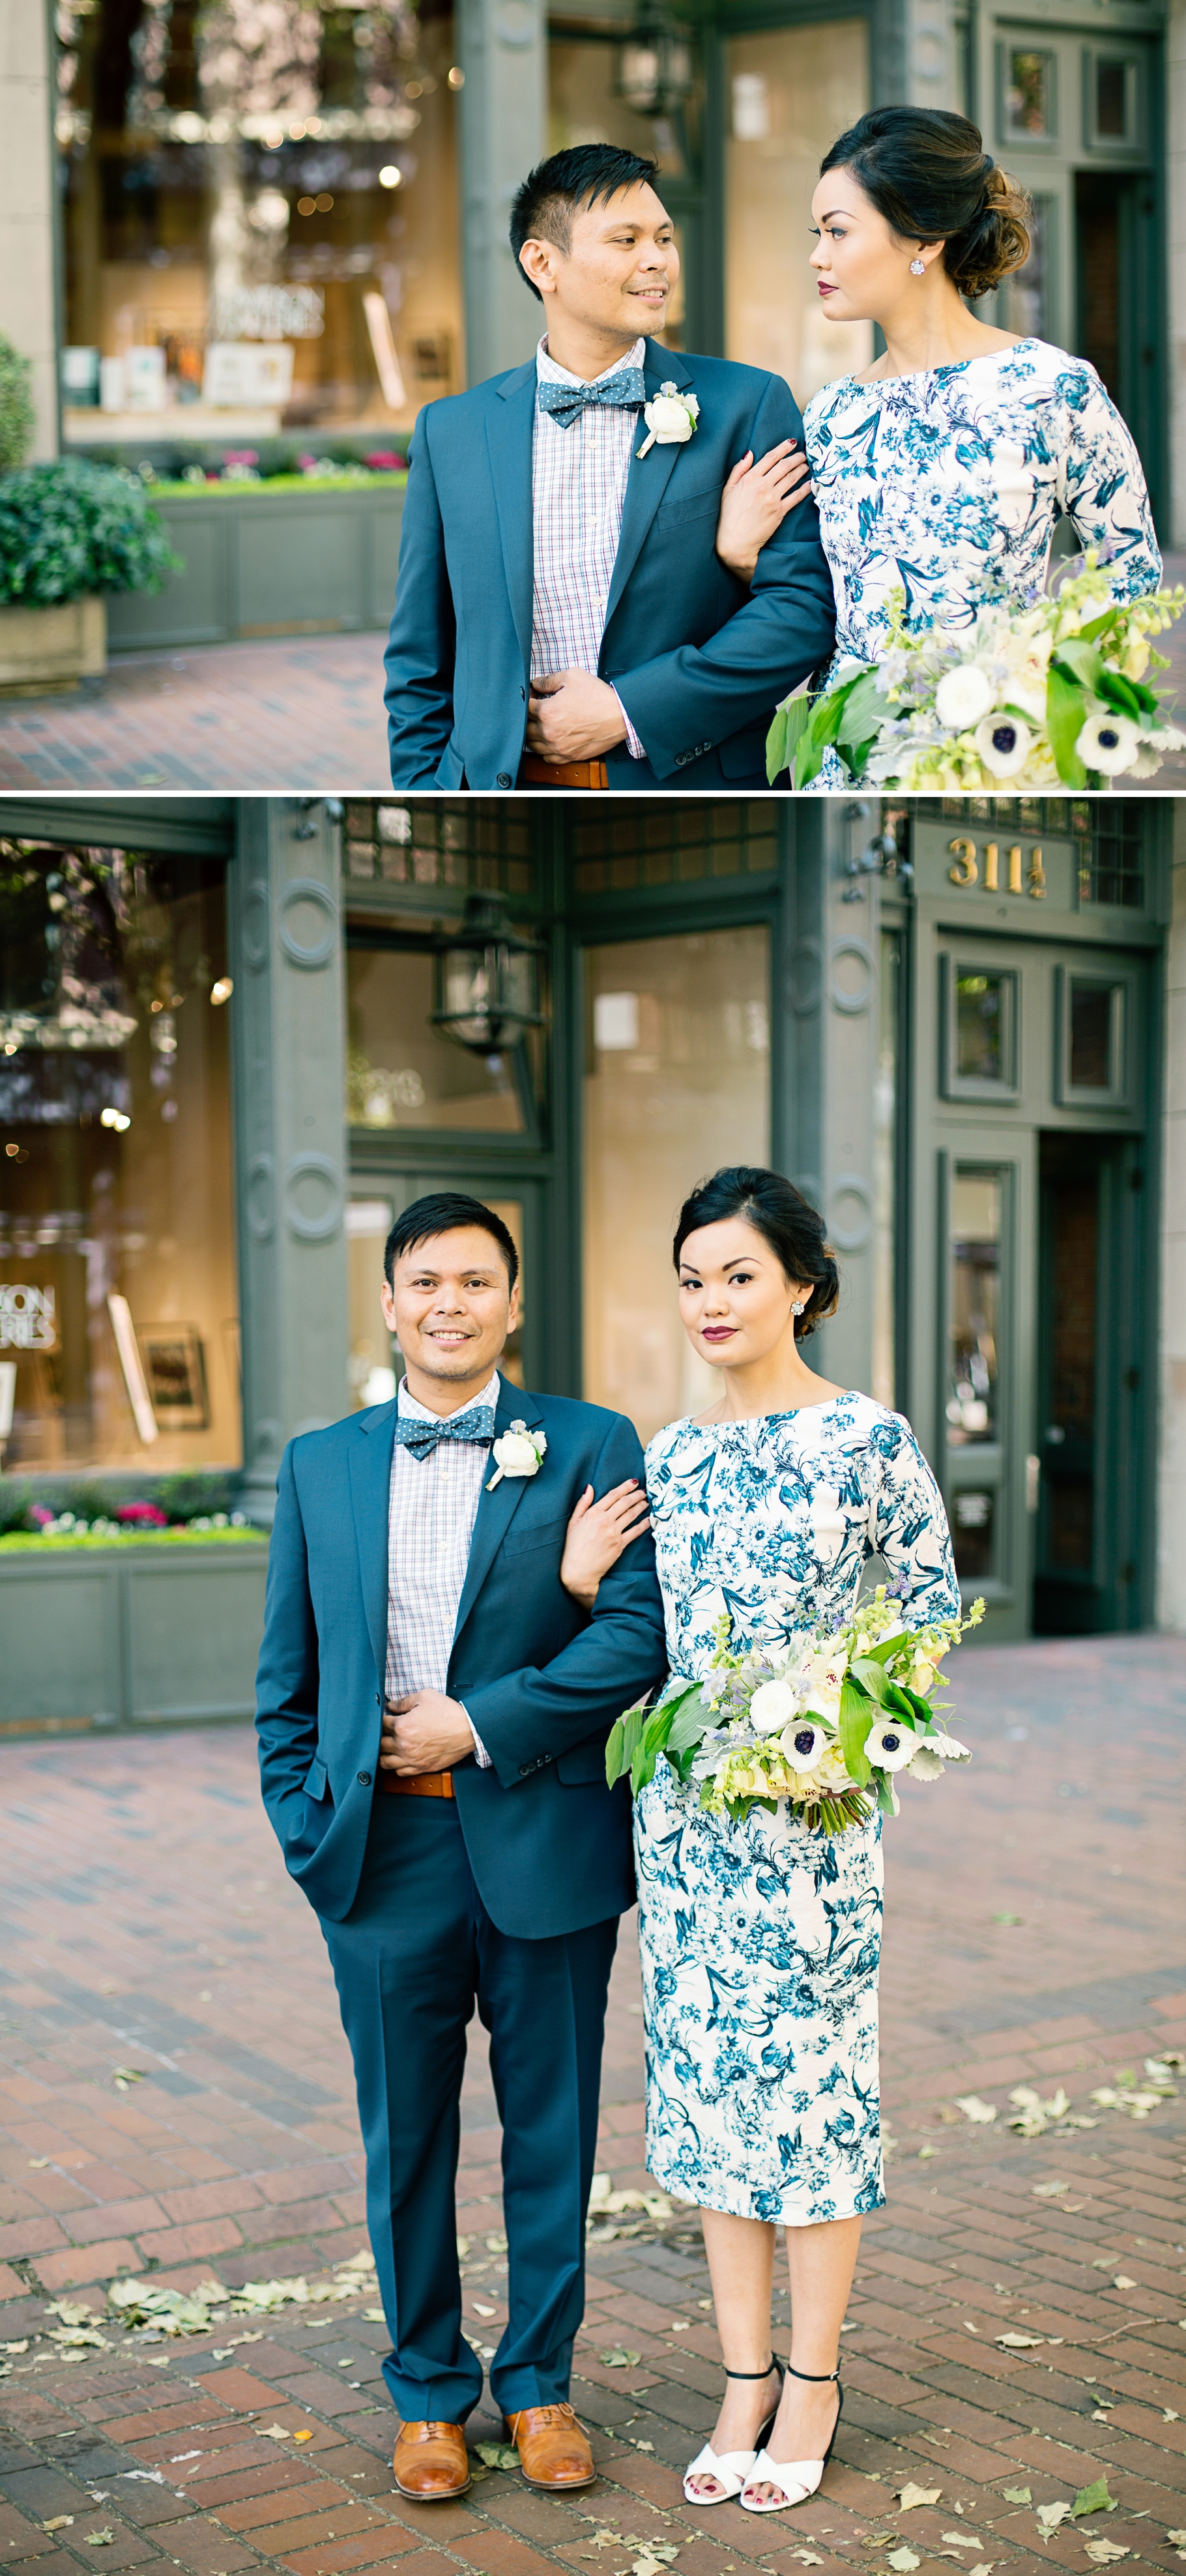 14-Bride-Groom-Portraits-Occidental-Park-Pioneer-Square-Seattle-Wedding-Day-Photographer-Photography-by-Betty-Elaine